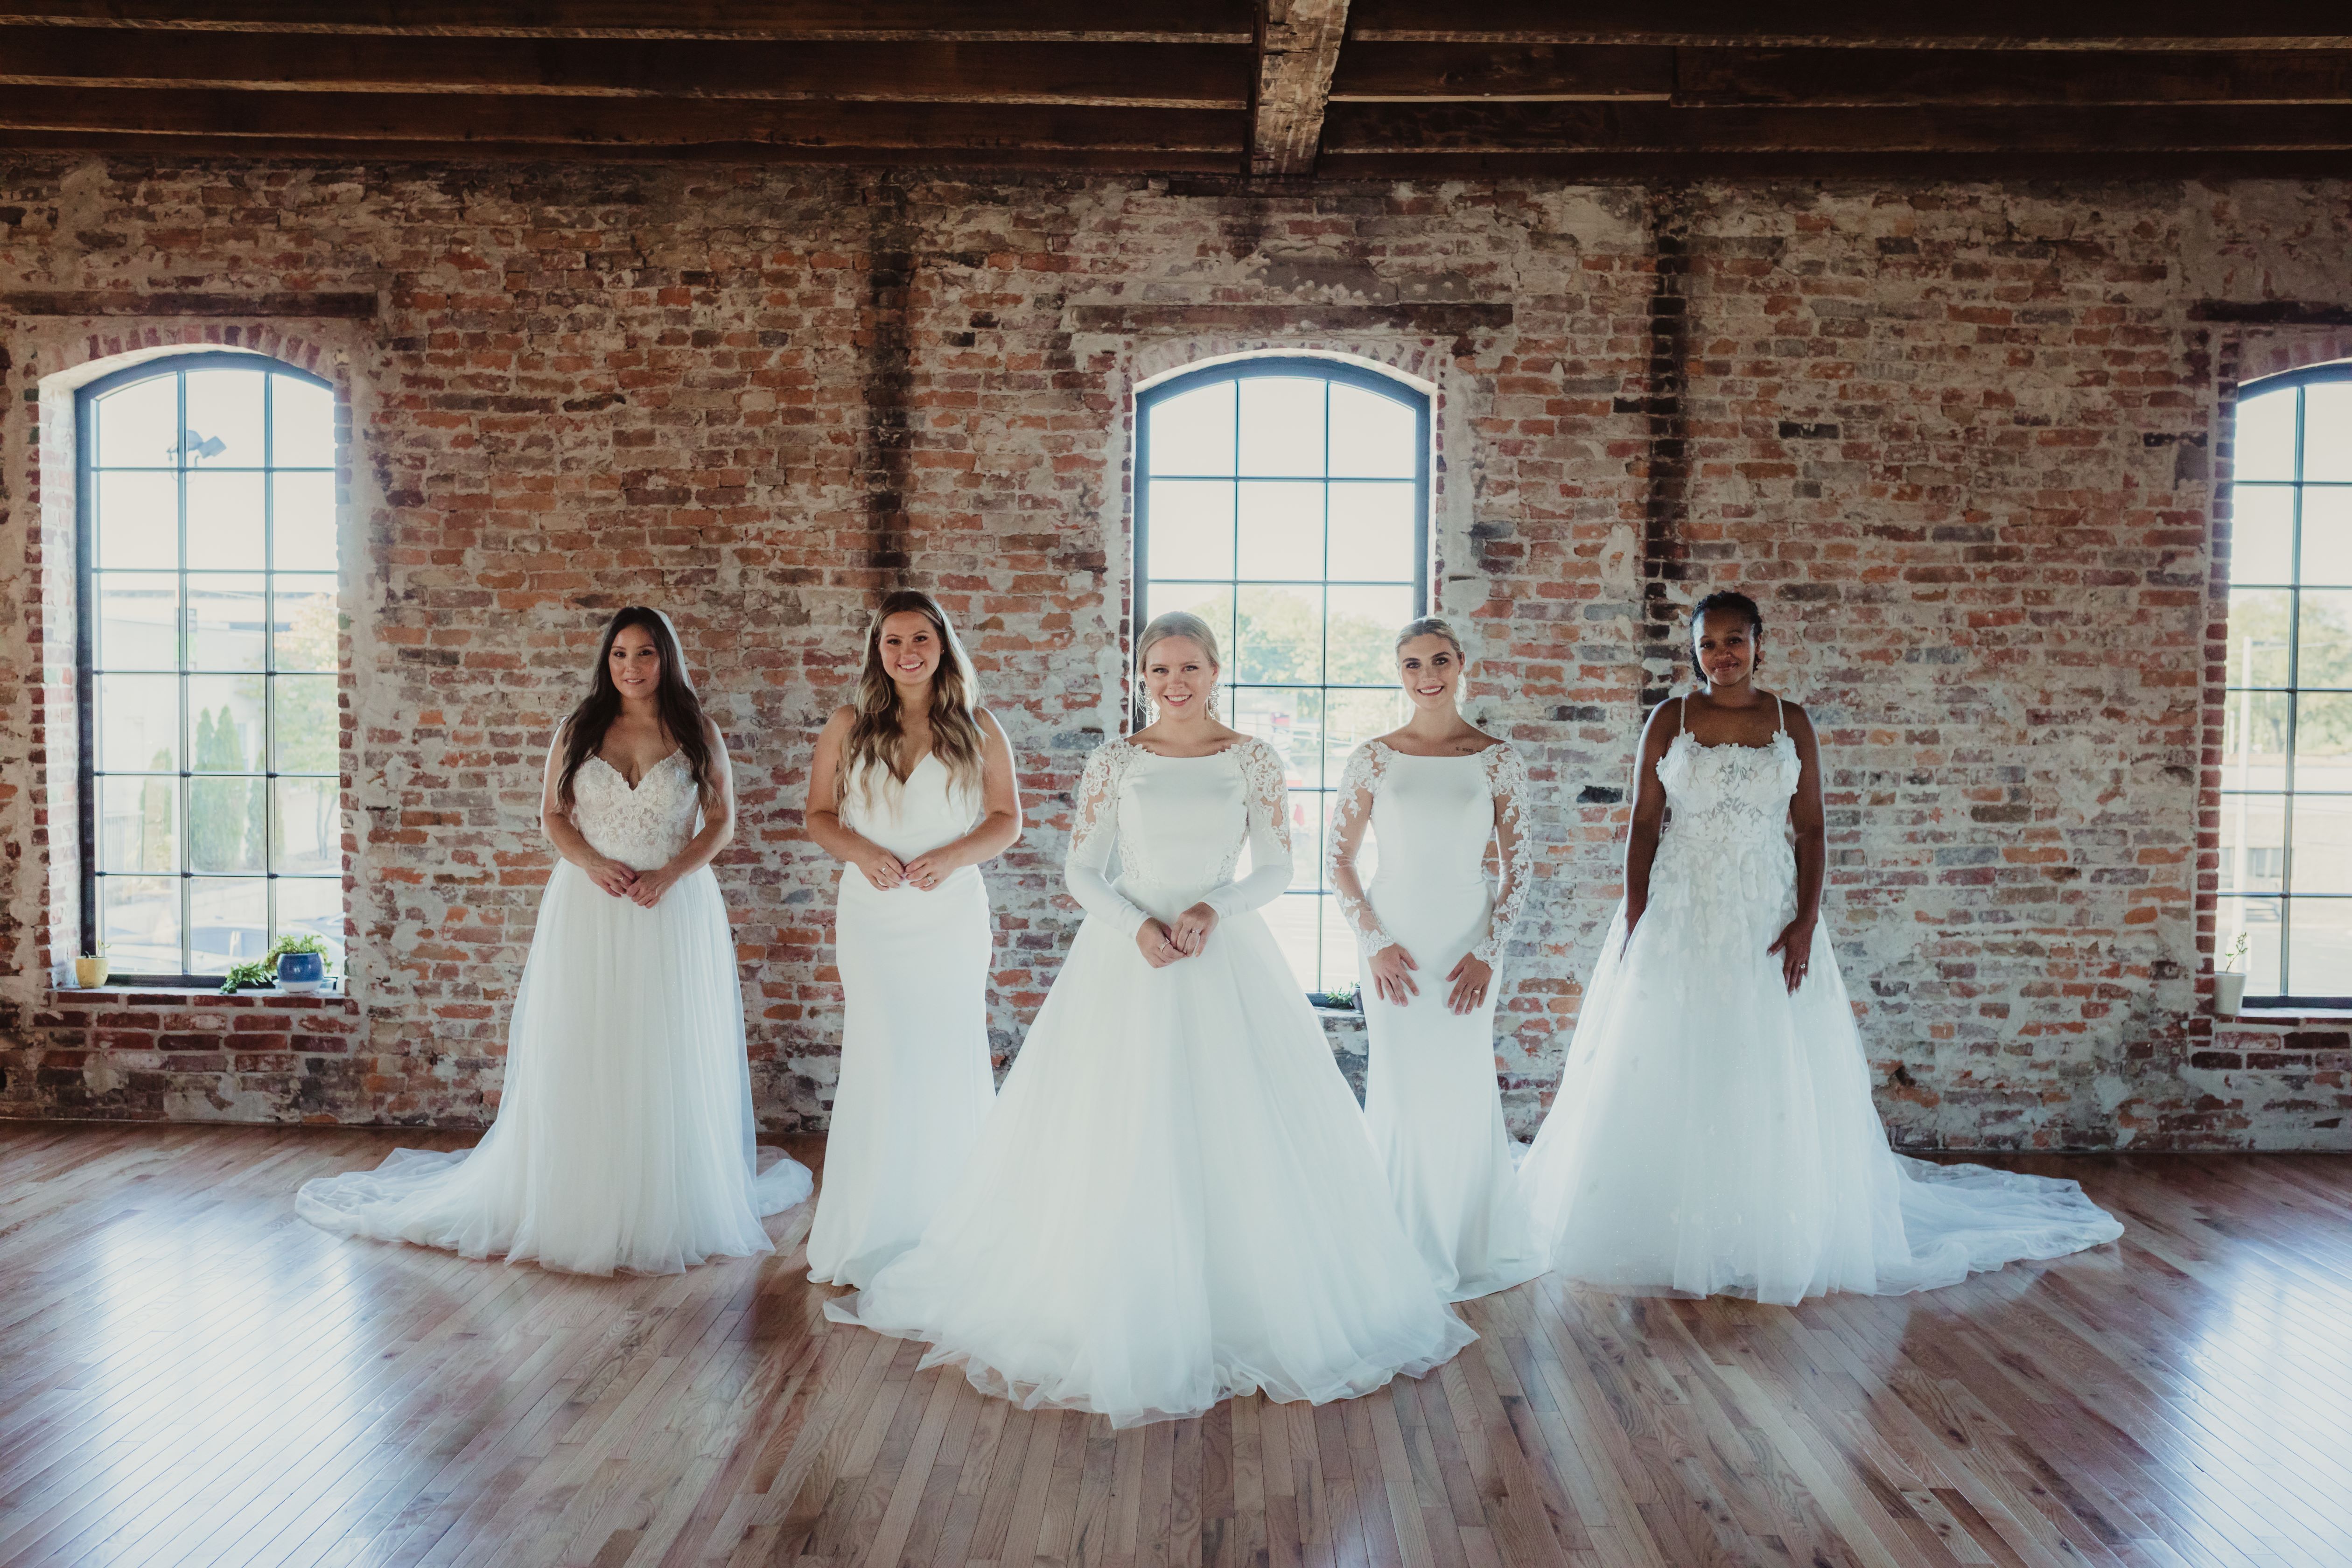 Meet Wedding Belles: Big City Style With Small City Prices